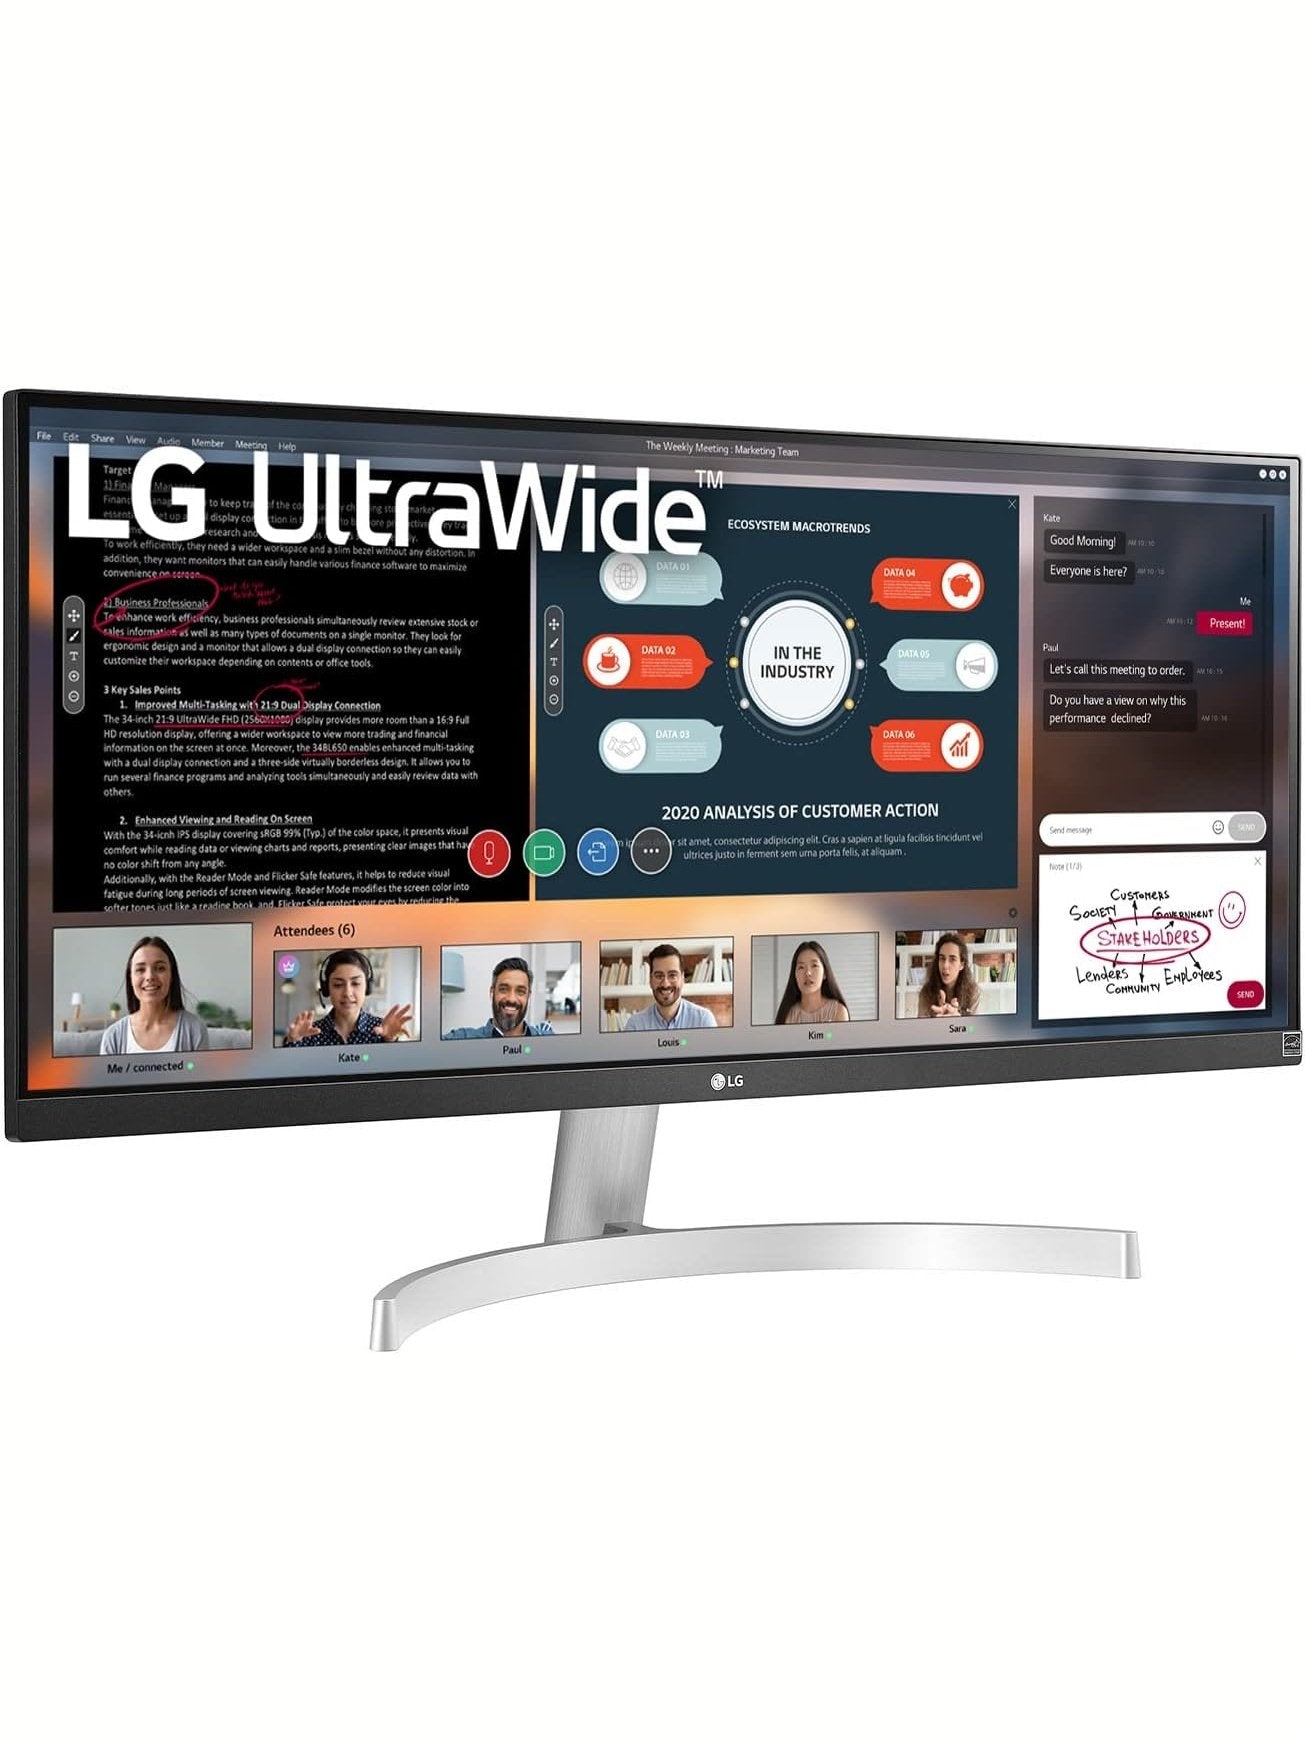 LG UltraWide FHD 29-Inch Computer Monitor 29WQ600-W, IPS with HDR 10 Compatibility, AMD FreeSync, and USB Type-C, Black